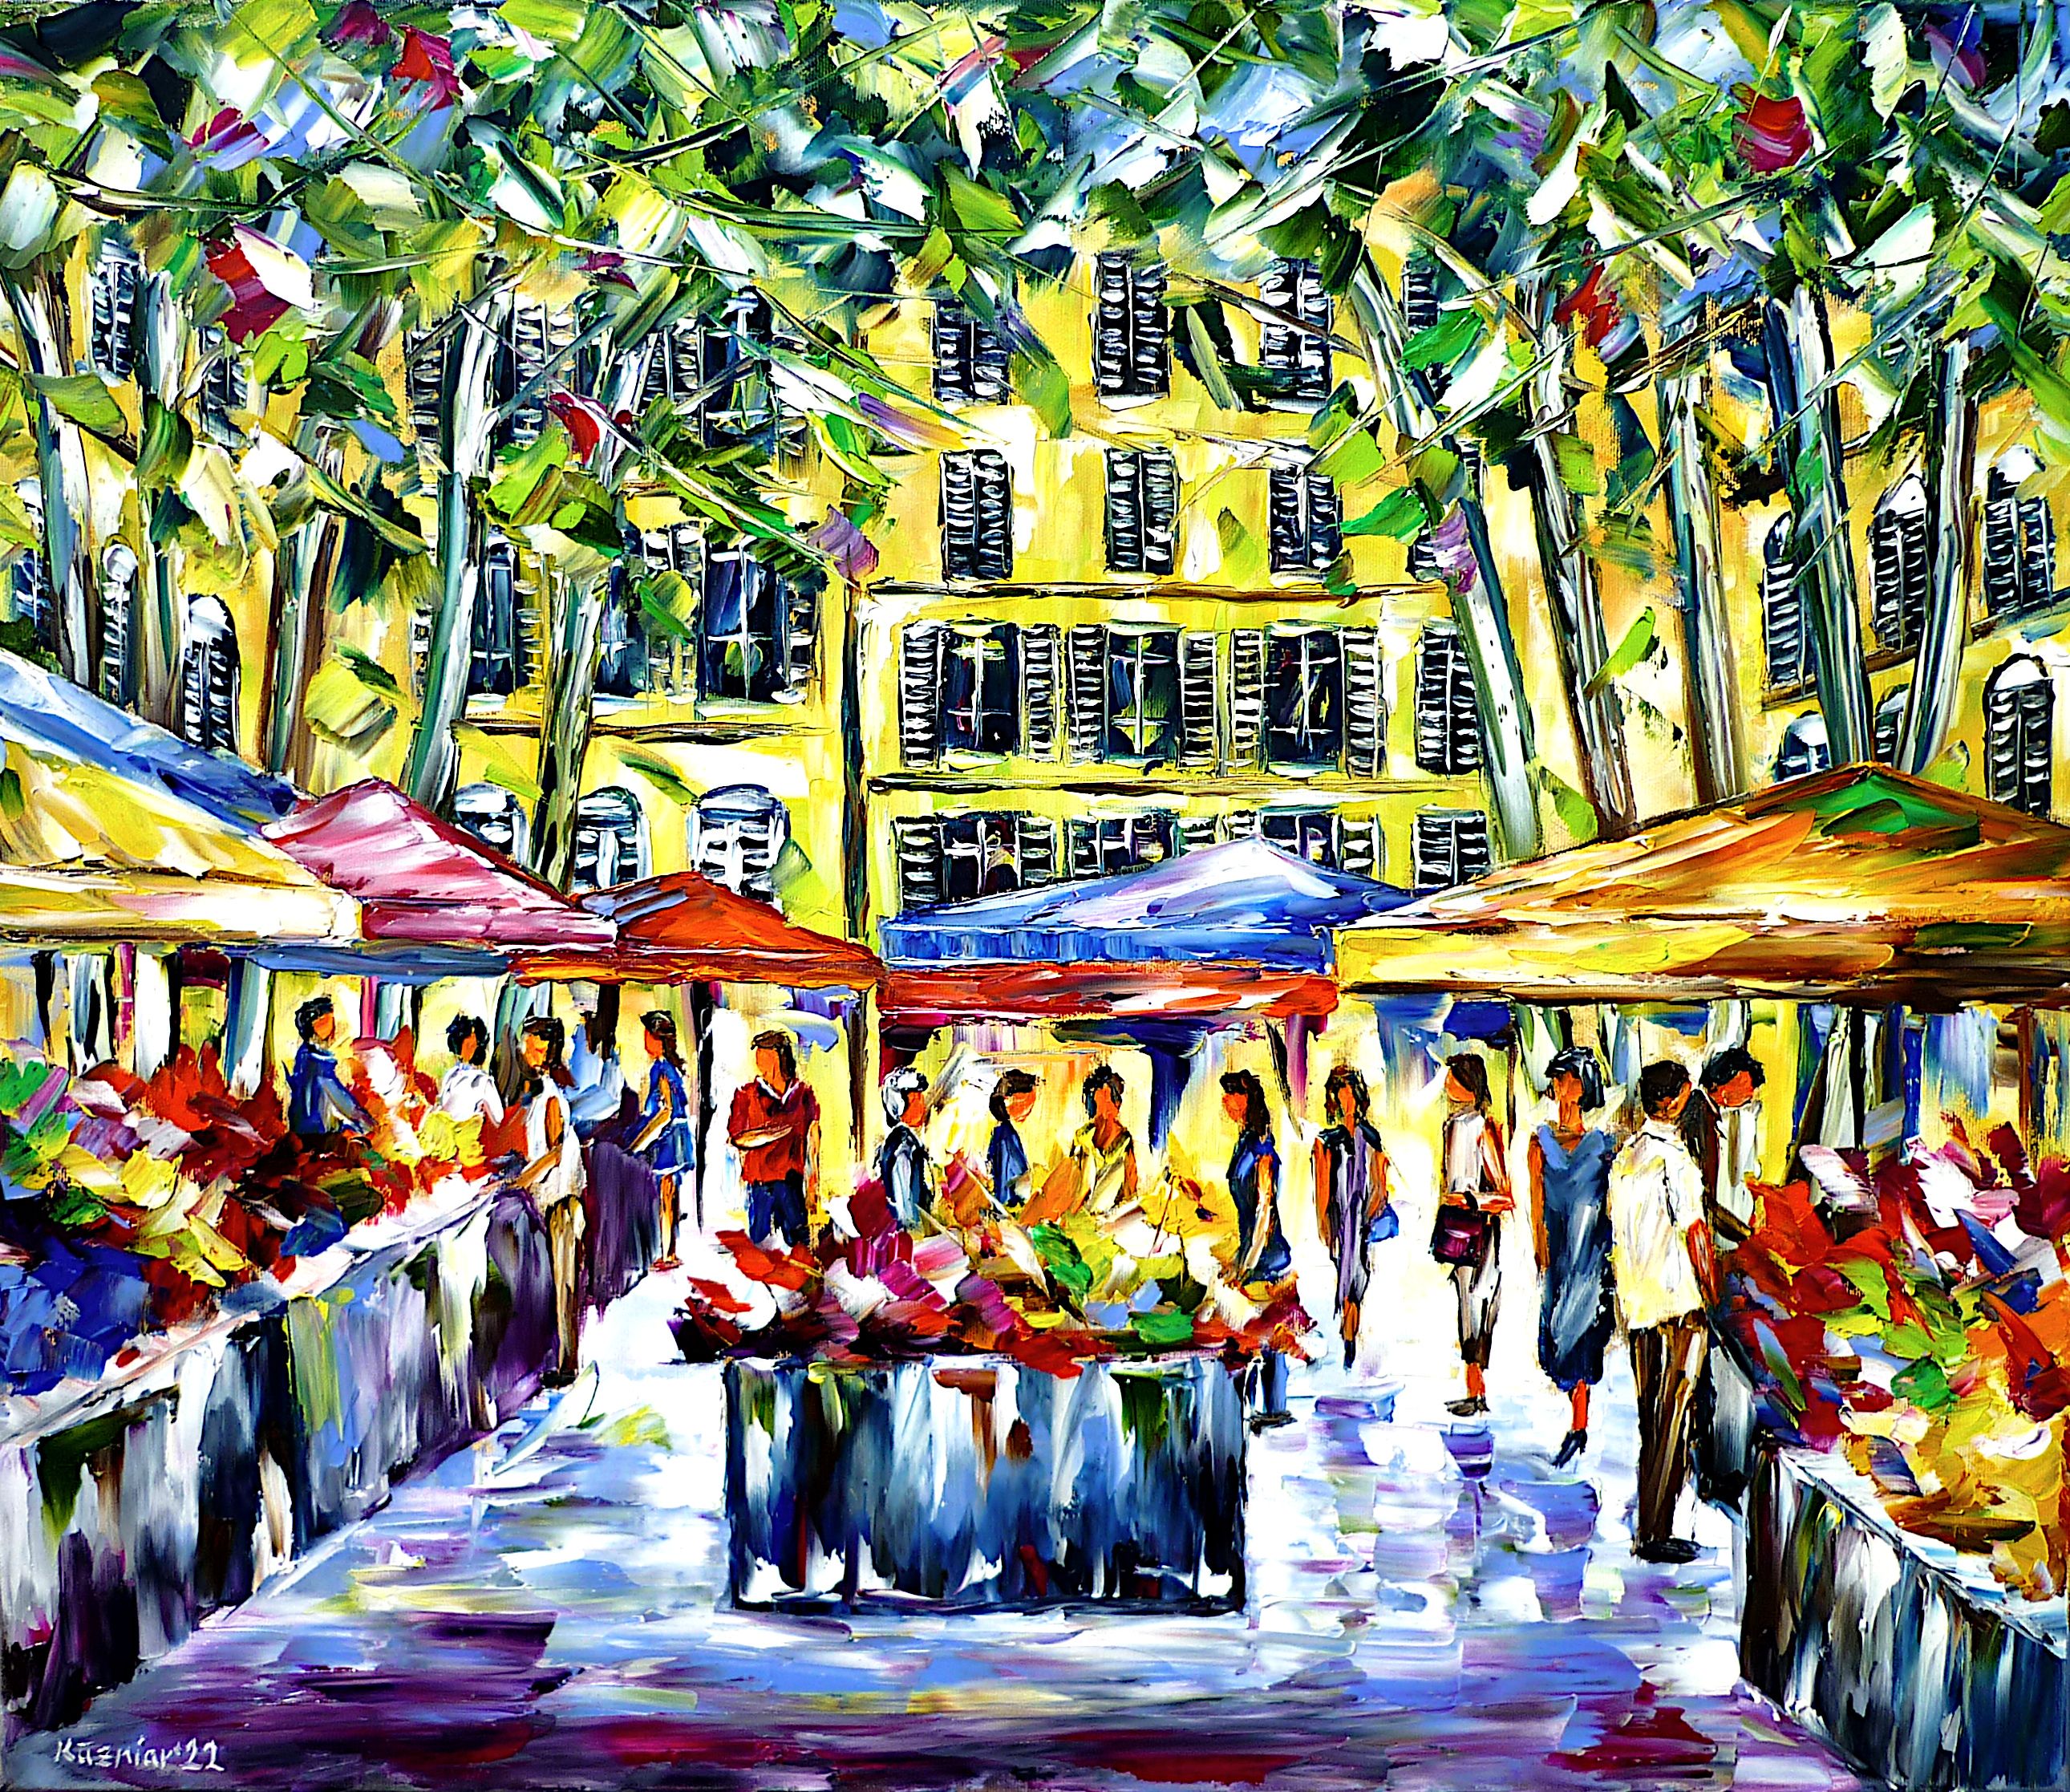 market in Aix-en-Provence,market scene,people in the market,market stall,market stalls,market life,marketplace,people strolling,strolling people,market stroll,city stroll,market people,market picture,market painting,flea market,flower market,flower stall,large parasols,market in the city,market day,colorful market,market love,market visitors,market goers,market in provence,provence cityscape,Old town of Aix,Aix-en-Provence,France,southern France,Provence,Cote d'Azur,summer in Provence,summer in southern france,people in summer,summer feelings,summer picture,summer painting,summer scenery,beautiful provence,summer day,sunlight,summer time,enjoy life,under the trees,provence beauty,provence love,provence lover,france love,palette knife oil painting,modern art,impressionism,expressionism,abstract painting,lively colors,colorful painting,bright colors,light reflections,impasto painting,figurative